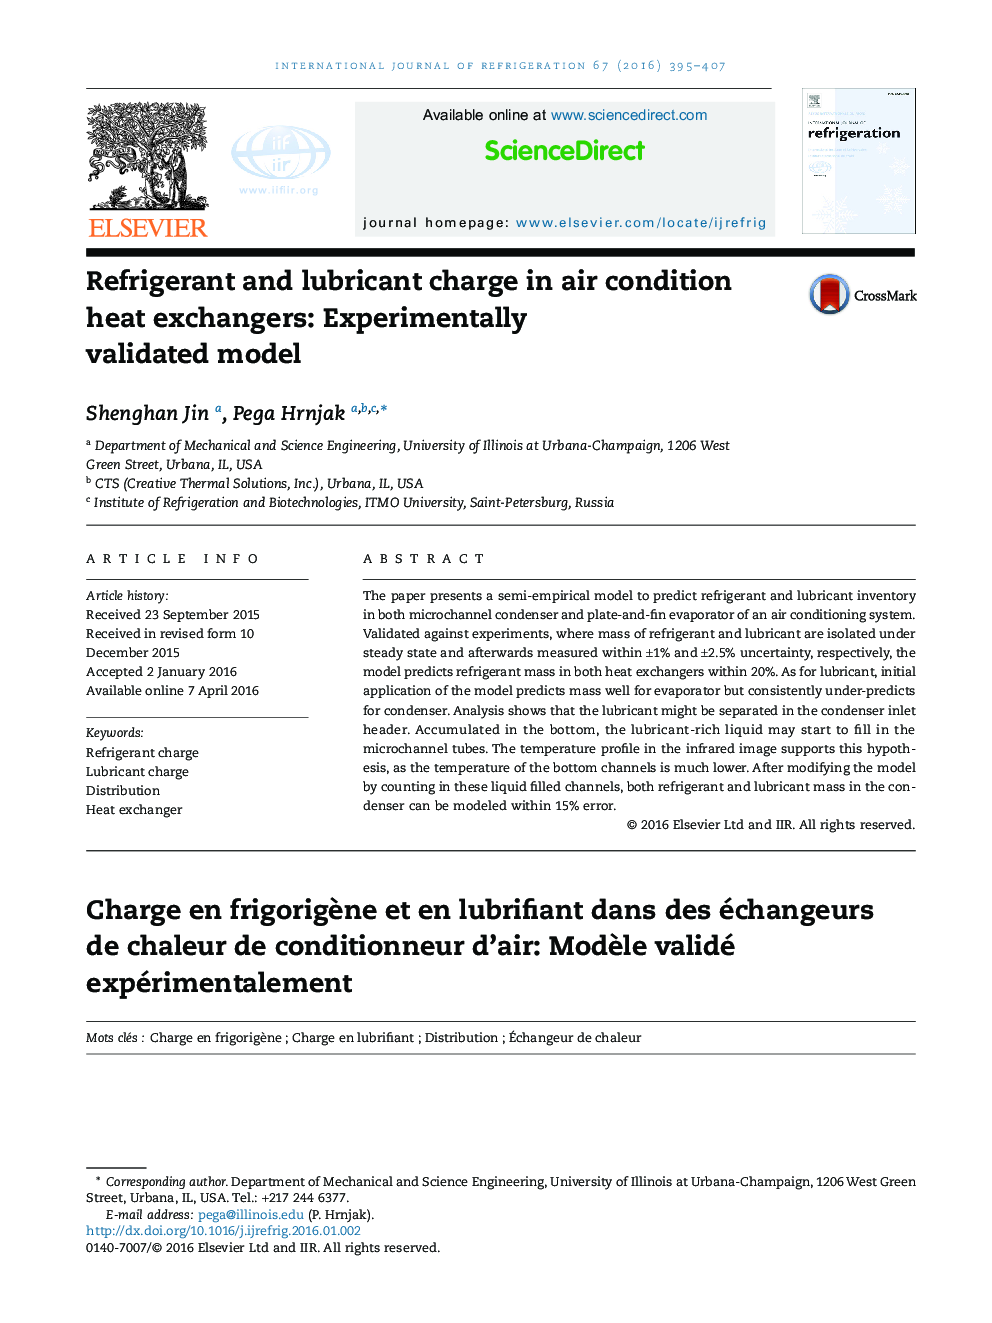 Refrigerant and lubricant charge in air condition heat exchangers: Experimentally validated model